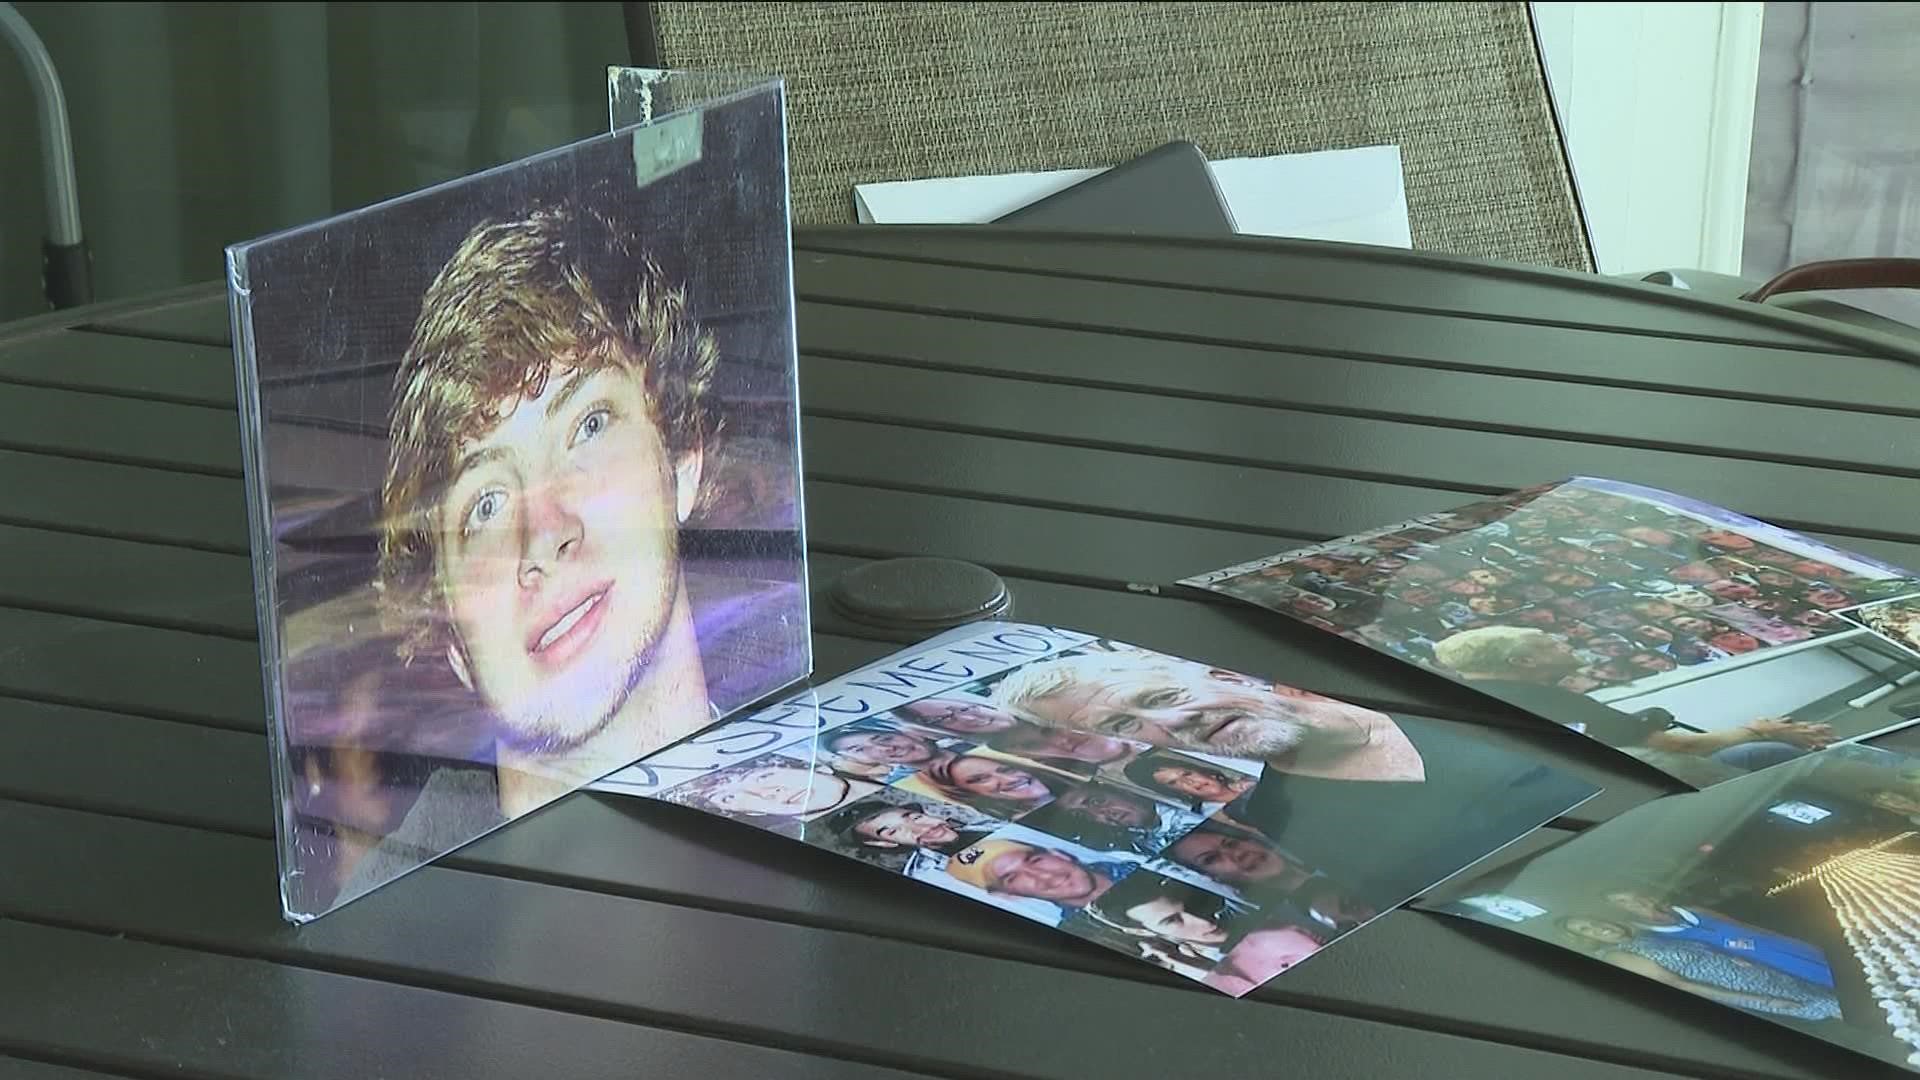 A Forsyth County woman understands the tragedy all too well after losing 4 family members to accidental drug overdose deaths.